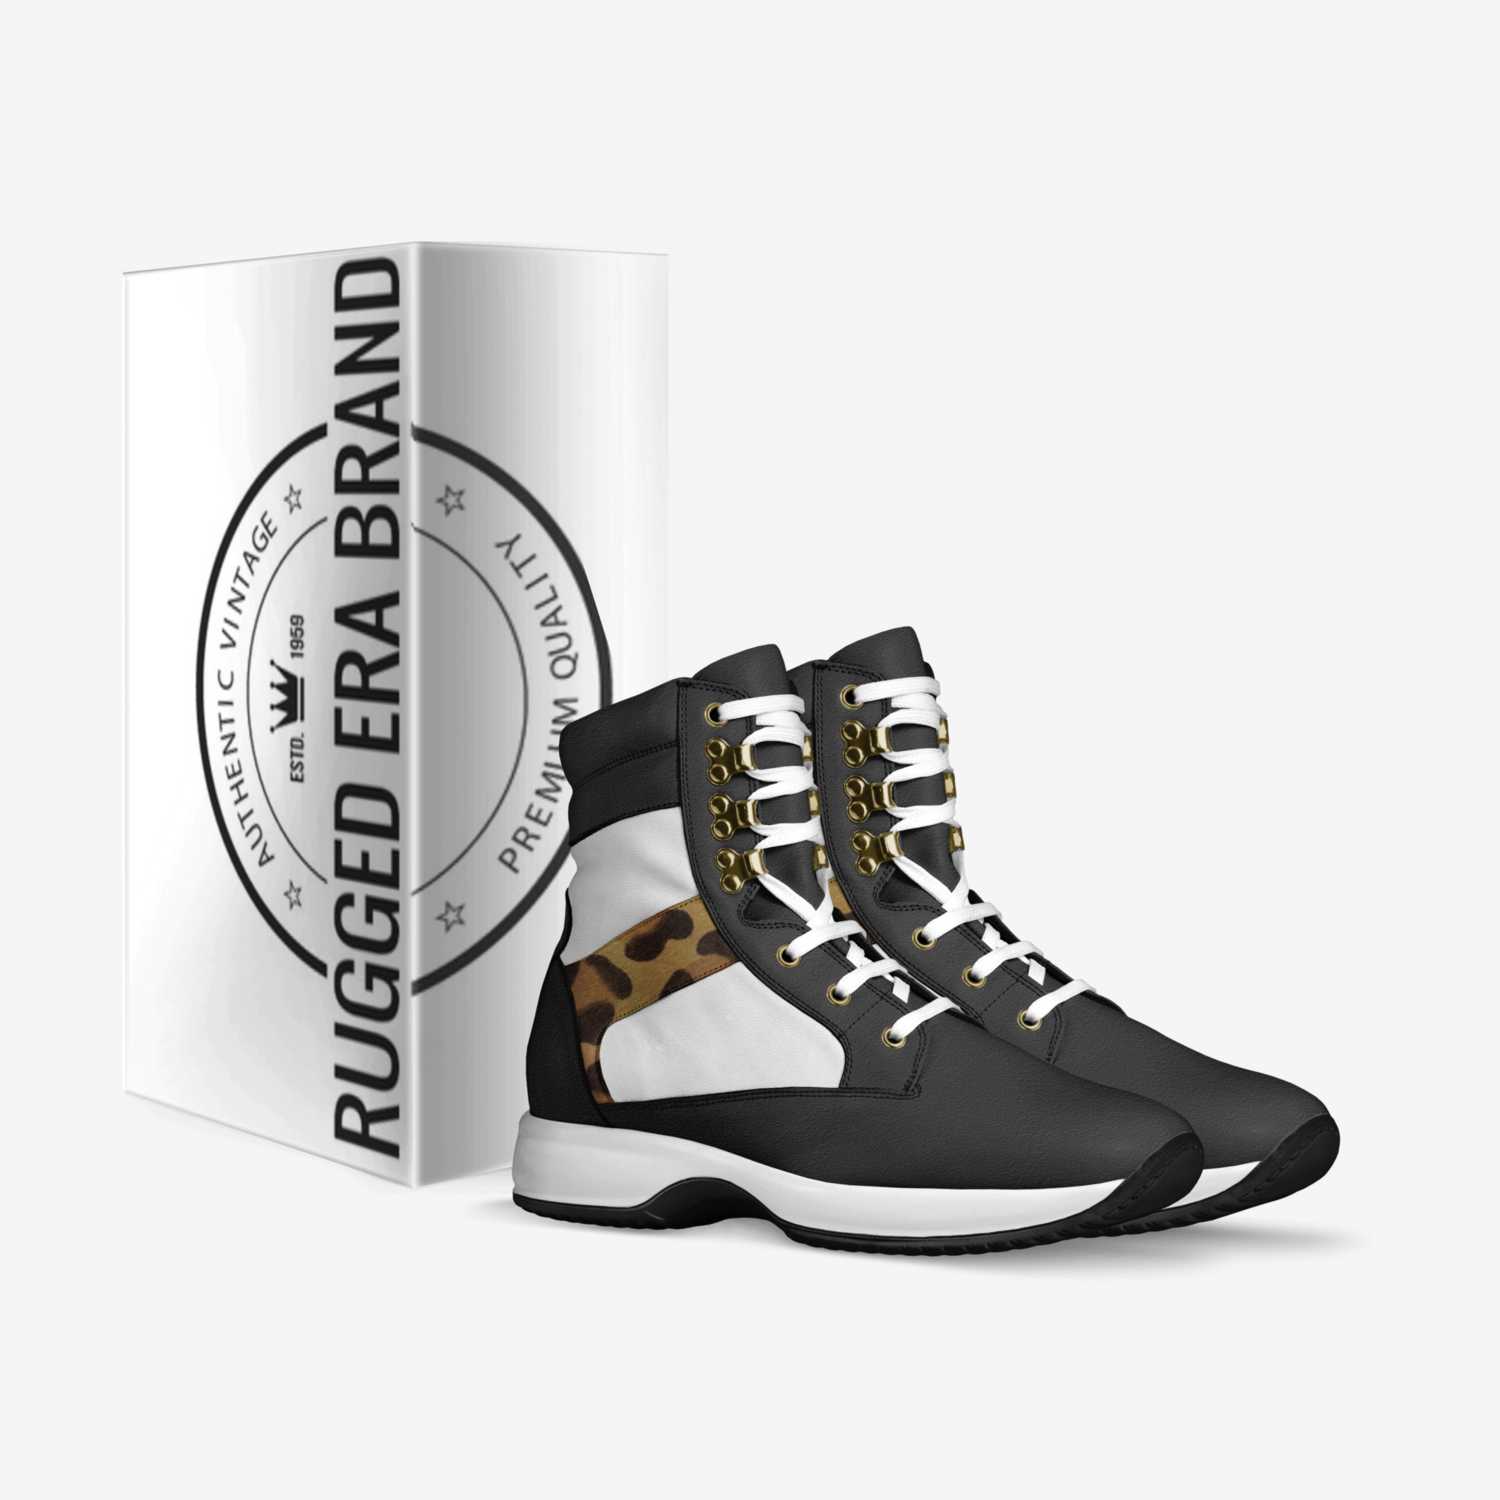 Rugged Era Brand custom made in Italy shoes by Shade Bowman | Box view